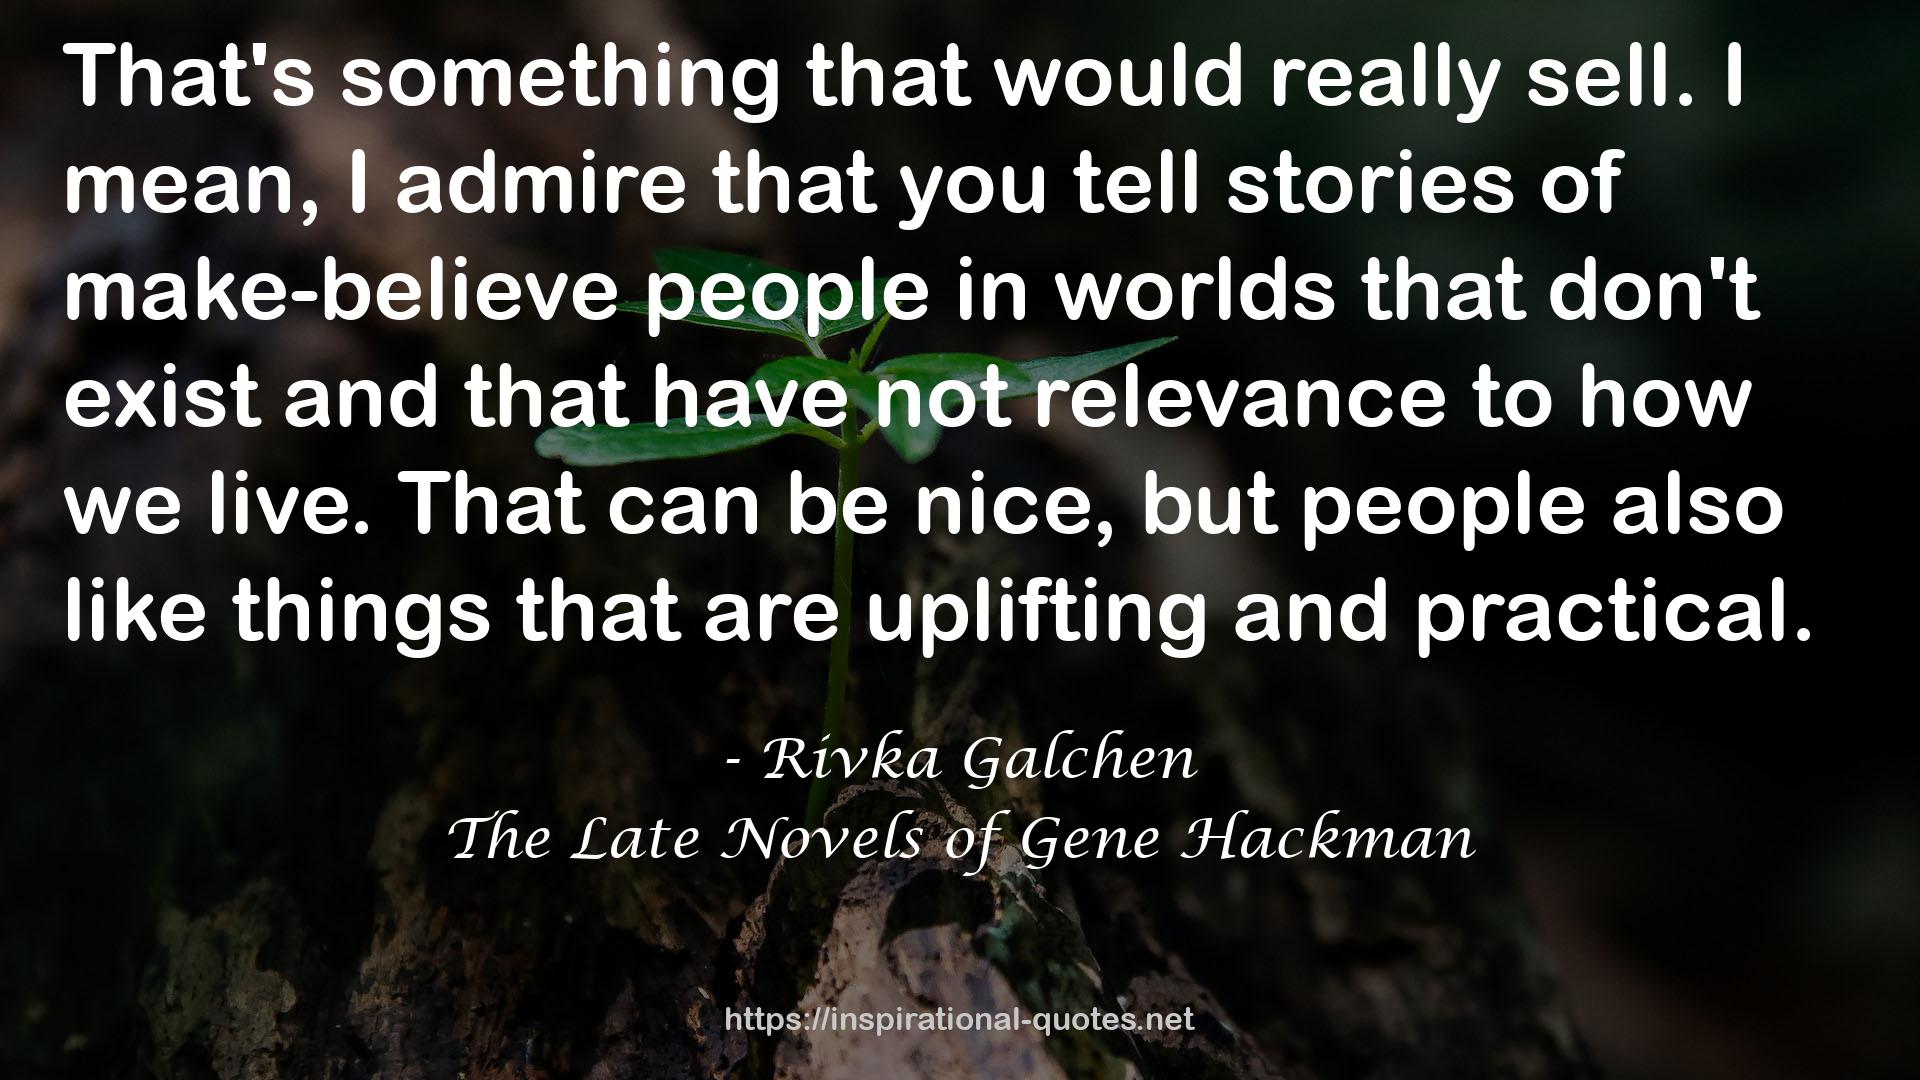 The Late Novels of Gene Hackman QUOTES